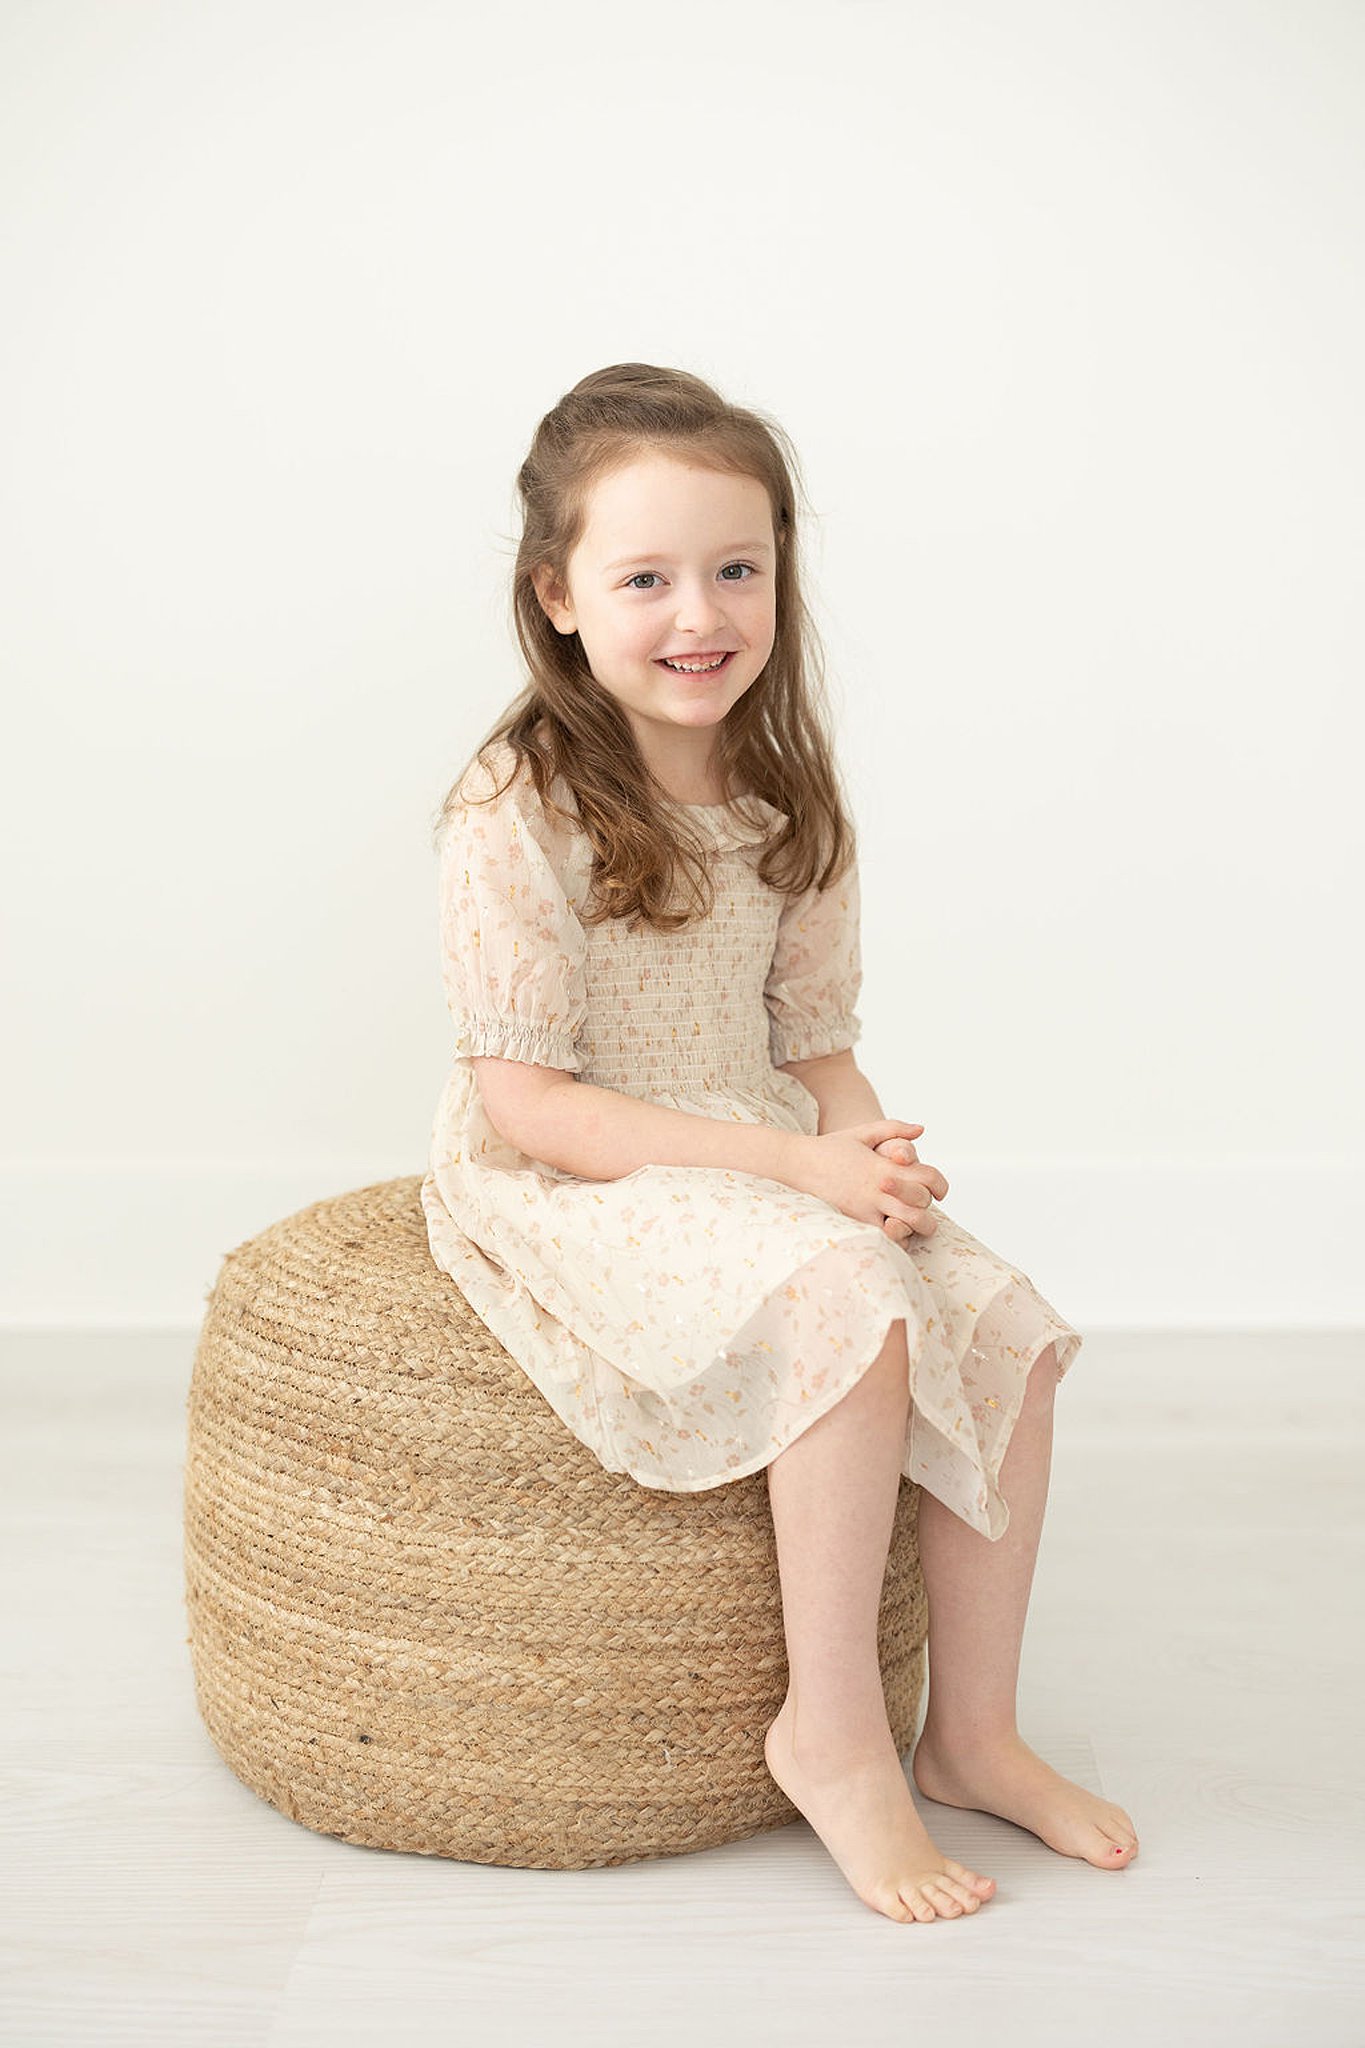 Girl in a patterned off-white dress sits on a woven stool in a studio Murray and finn